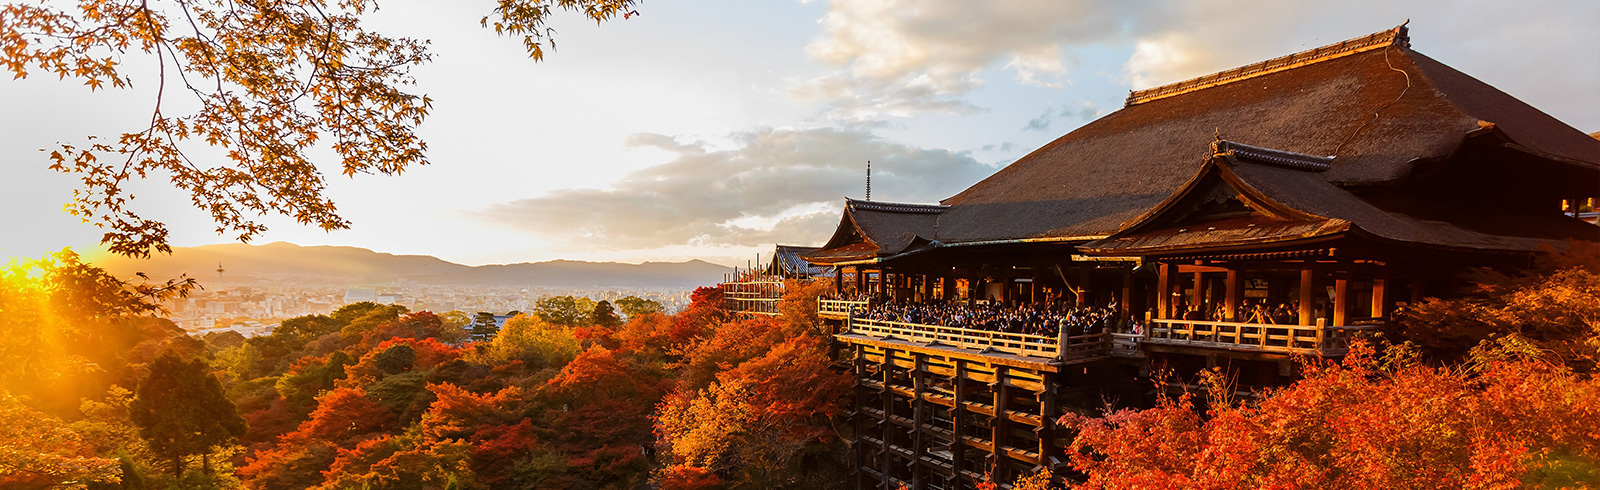 Kiyomizu-dera in japan, used to promote Klook offer with SC Smart Card